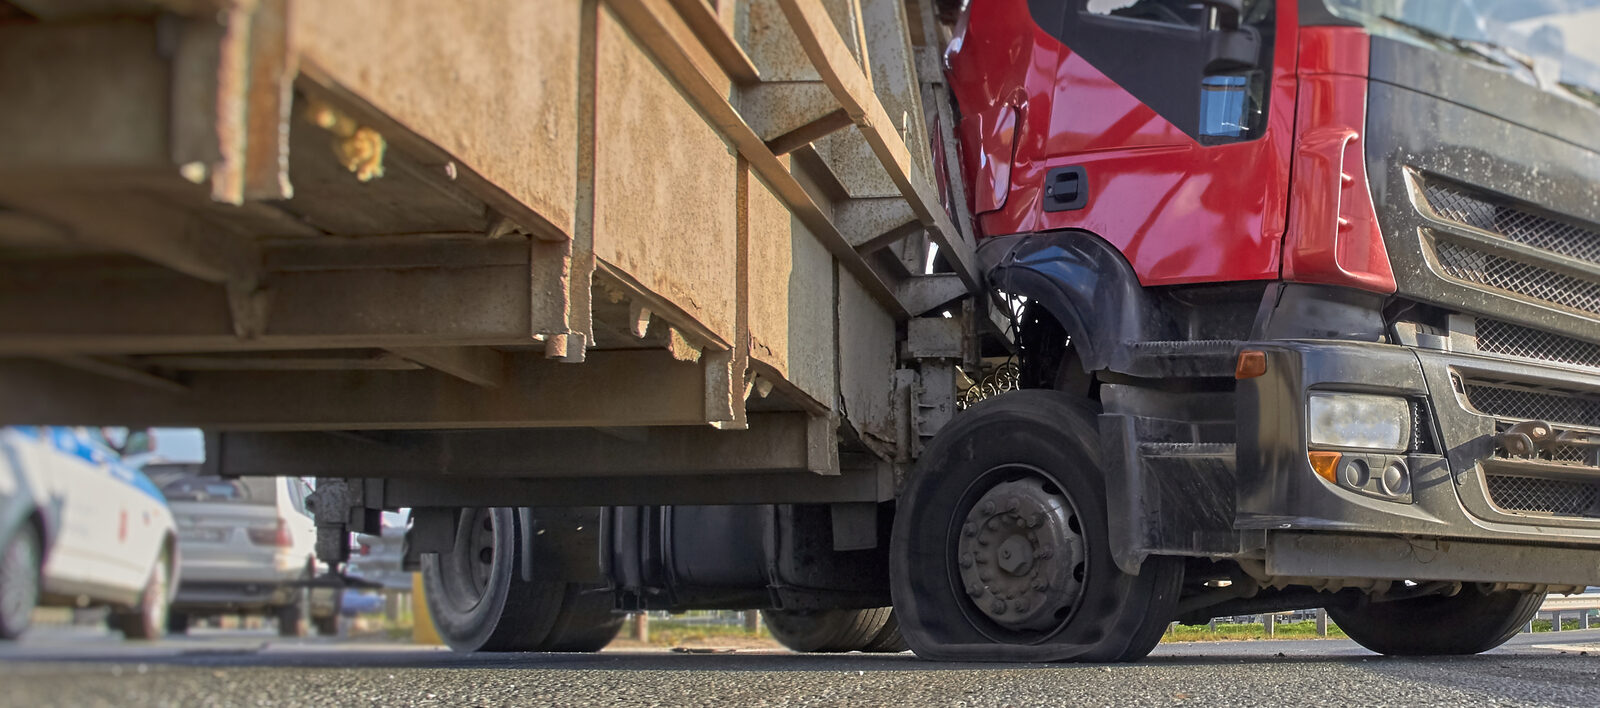 Truck Accident Law Firm for Illinois Cases | Crystal Lake, IL Truck Crash Attorneys | Burger Law